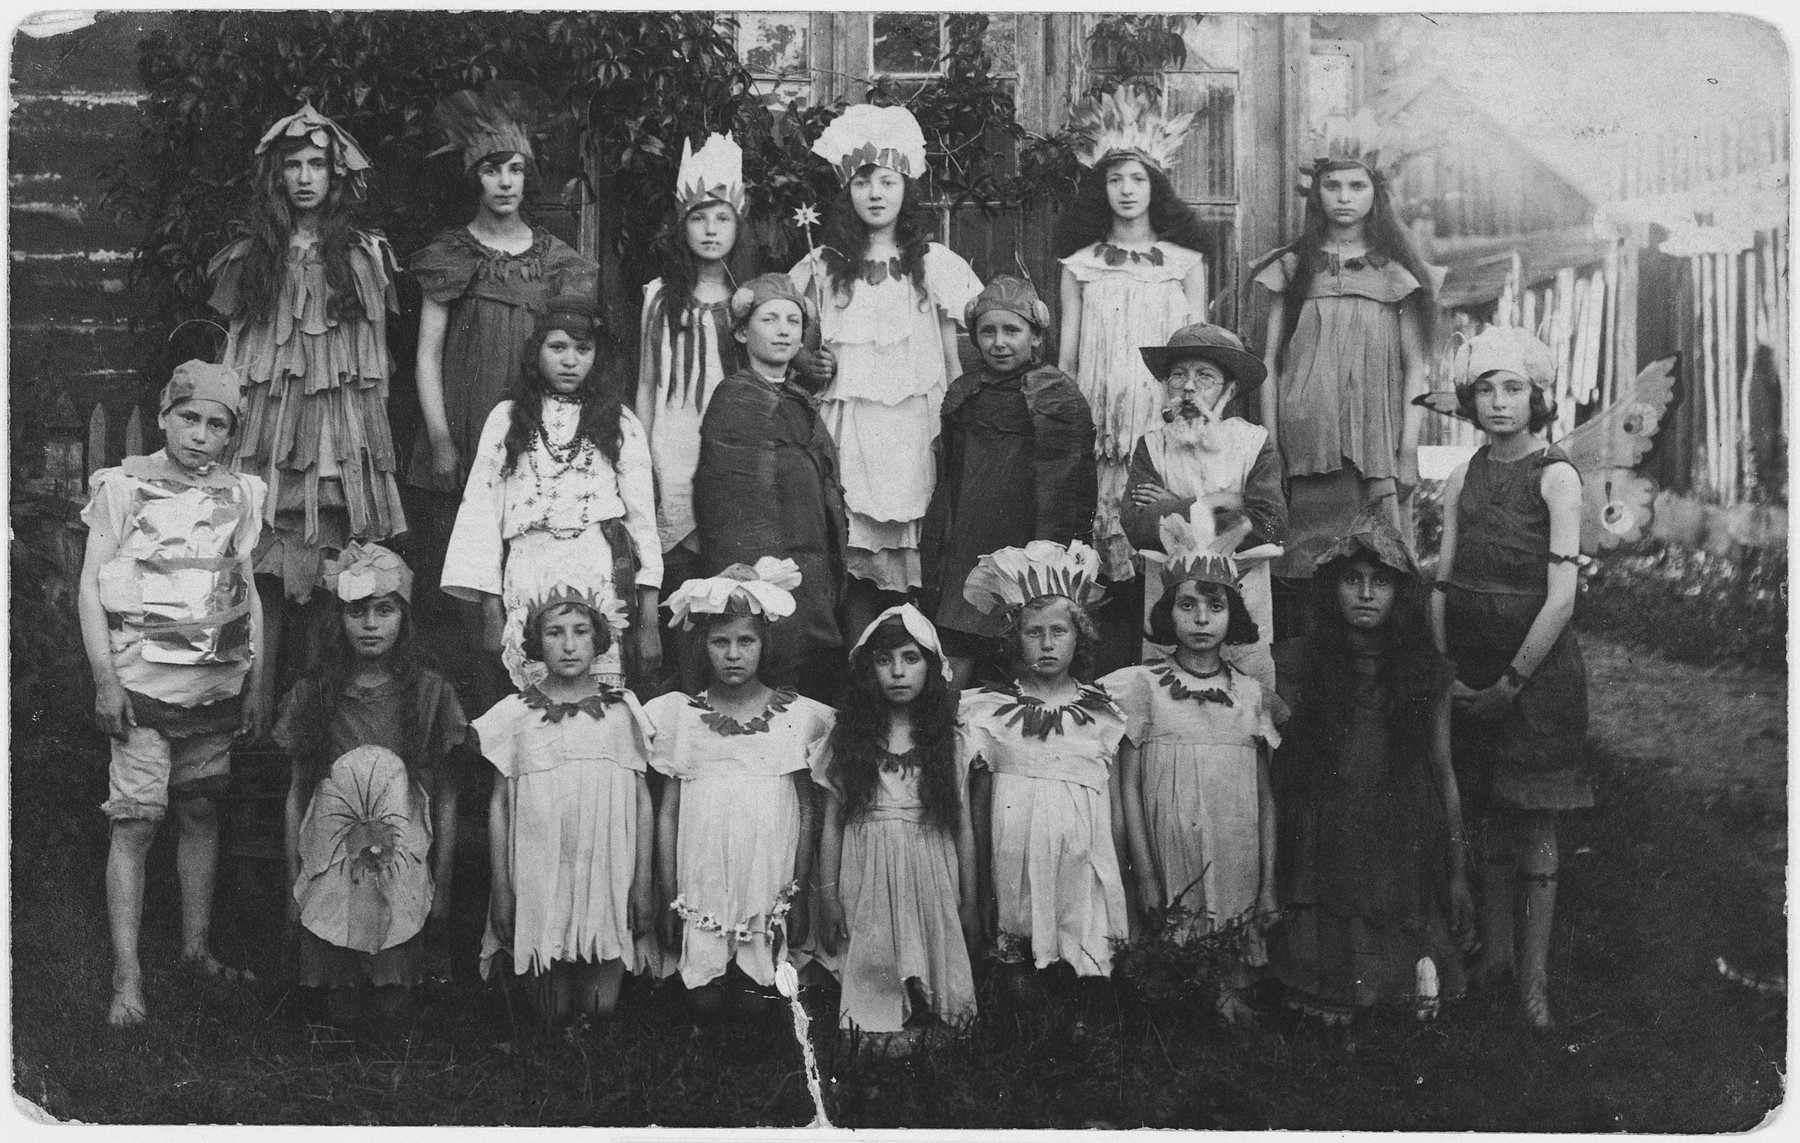 Children in the Yiddish school in Bielsk perform the play, "Among the Flowers".

Genia Kac is standing at the back, fourth from the left.